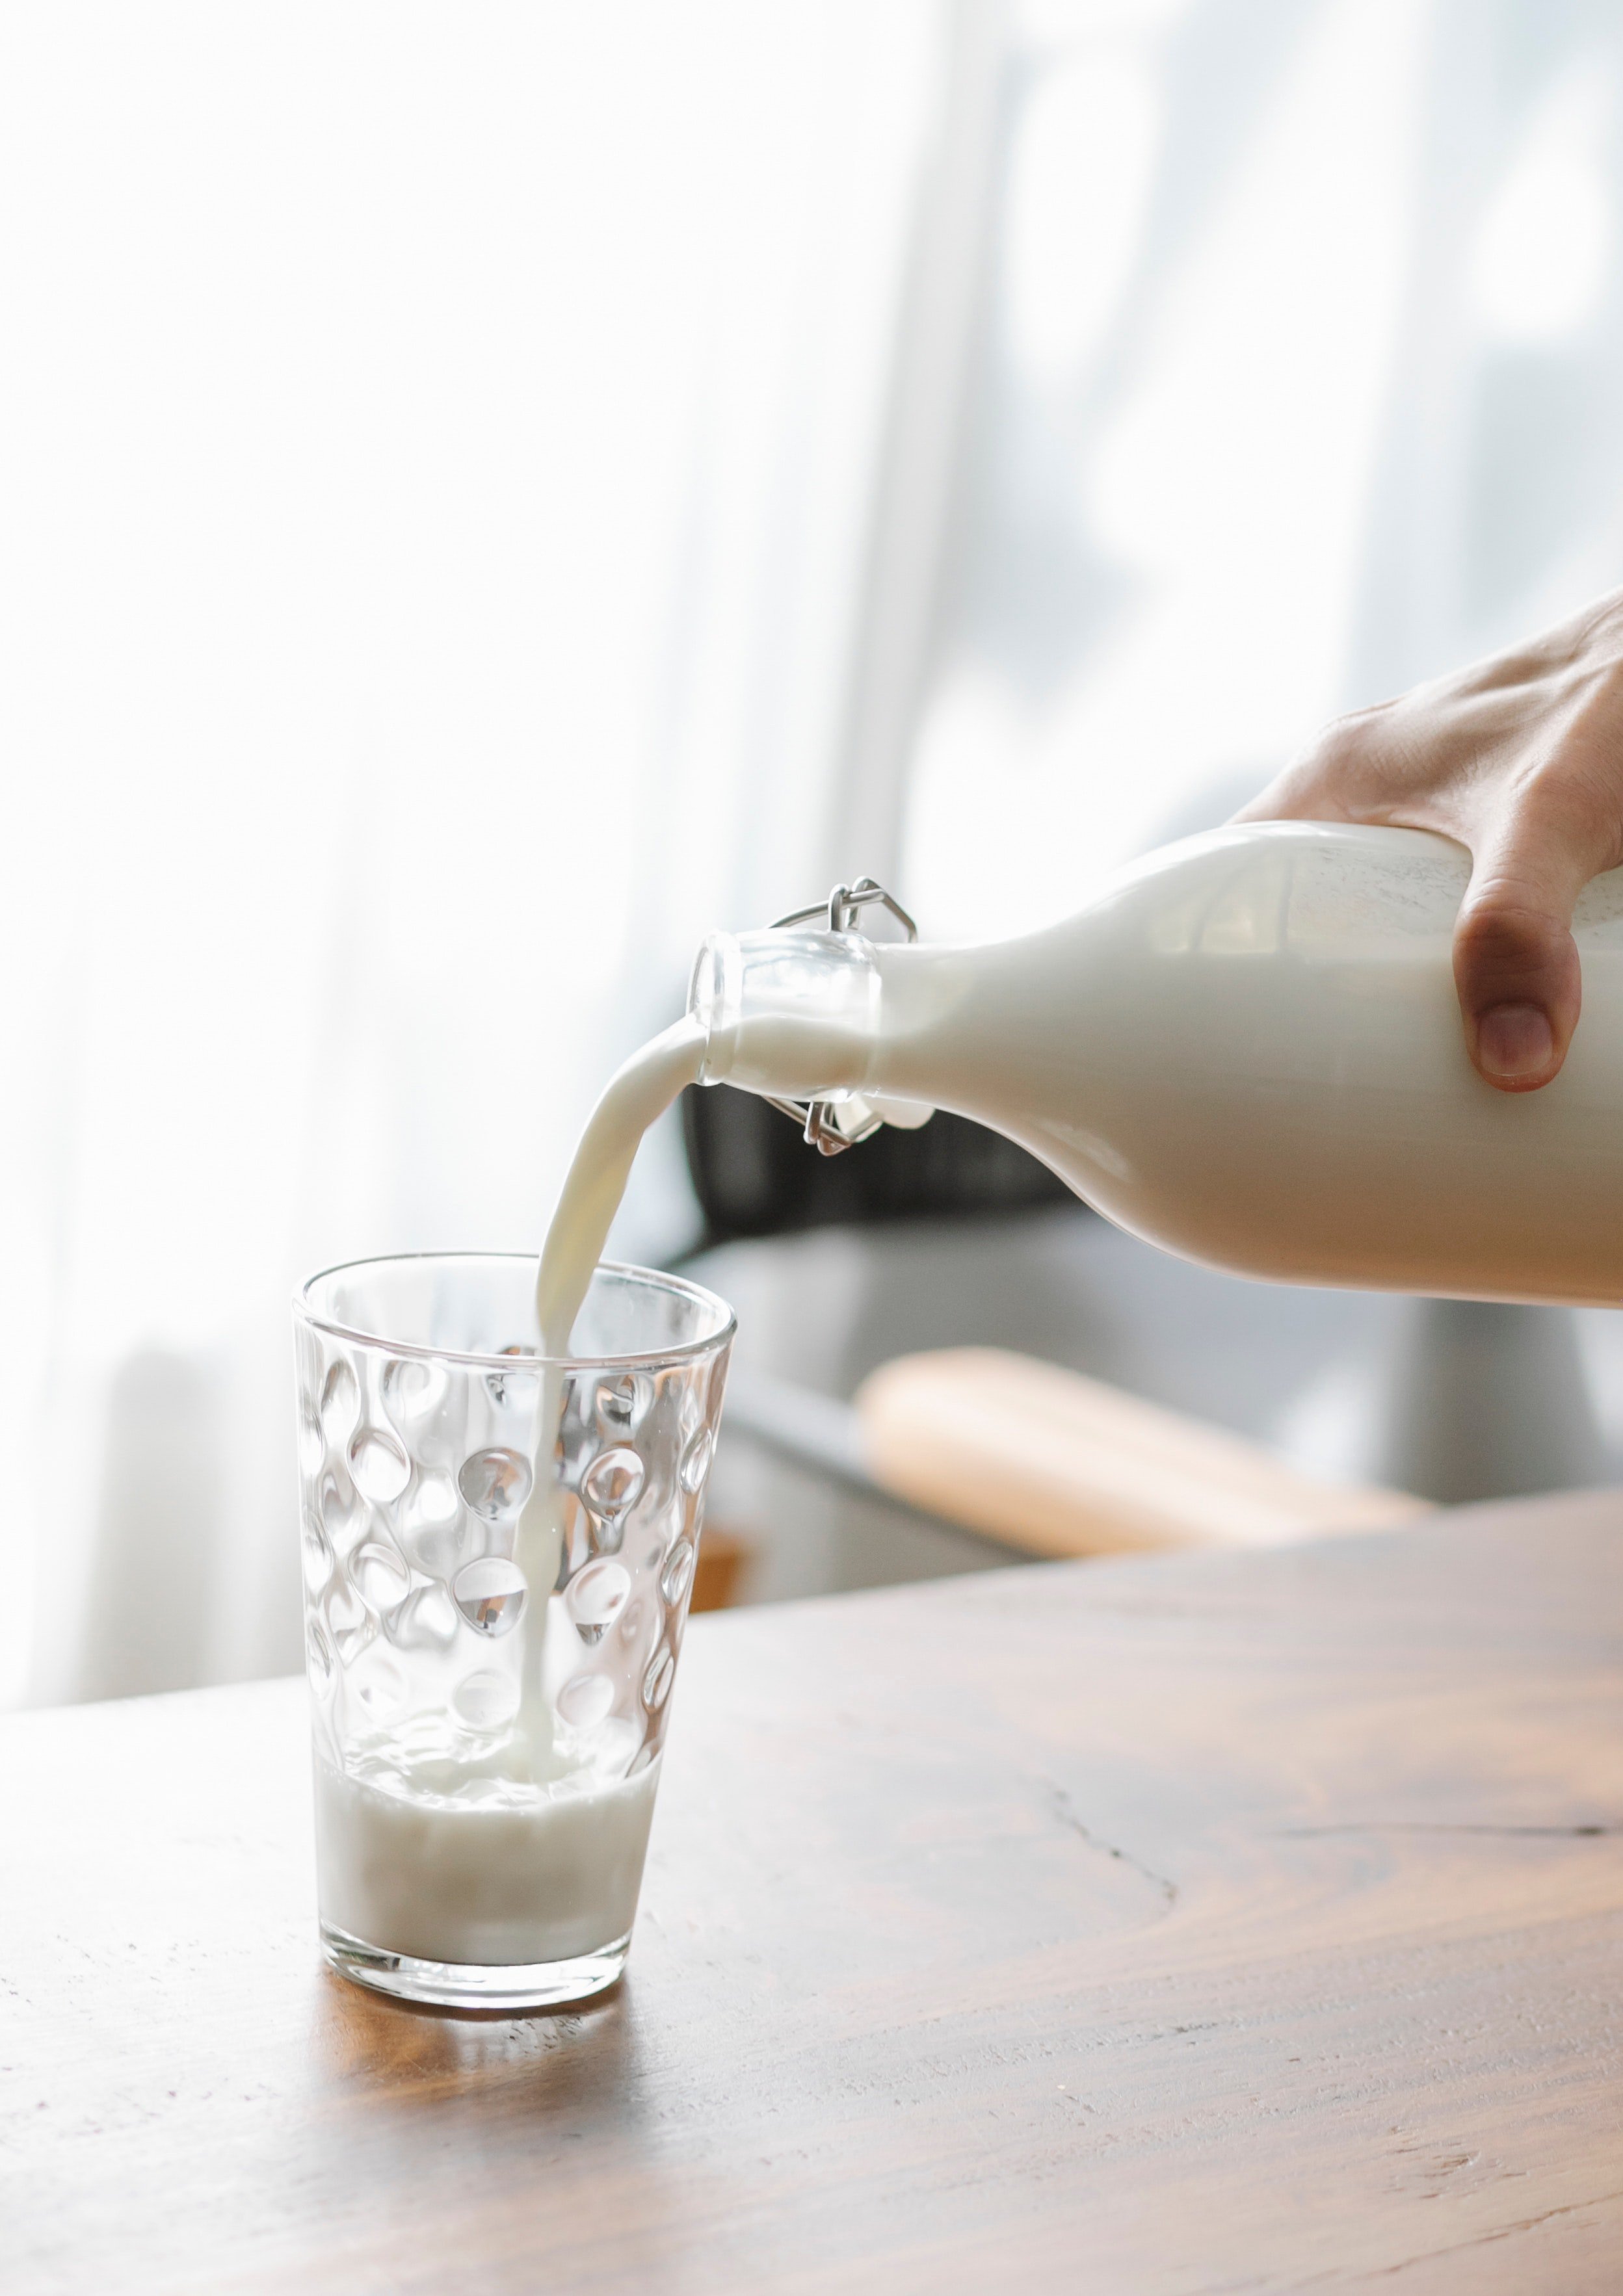 A person pouring milk in a glass from a bottle